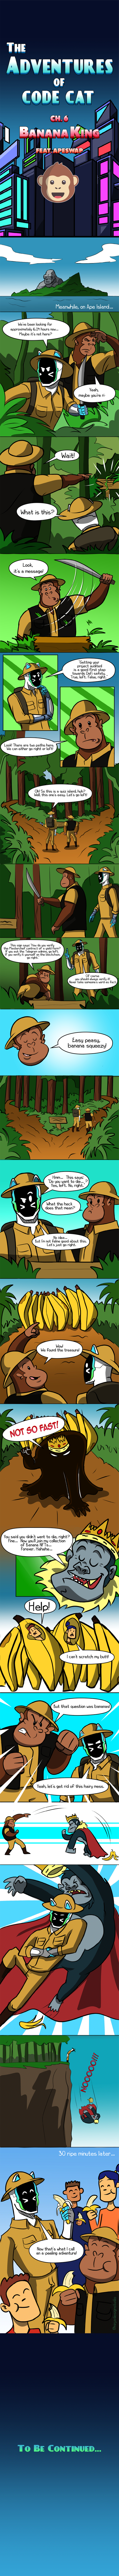 The Adventures of Code Cat Ch. 6 Banana King Feat. ApeSwap